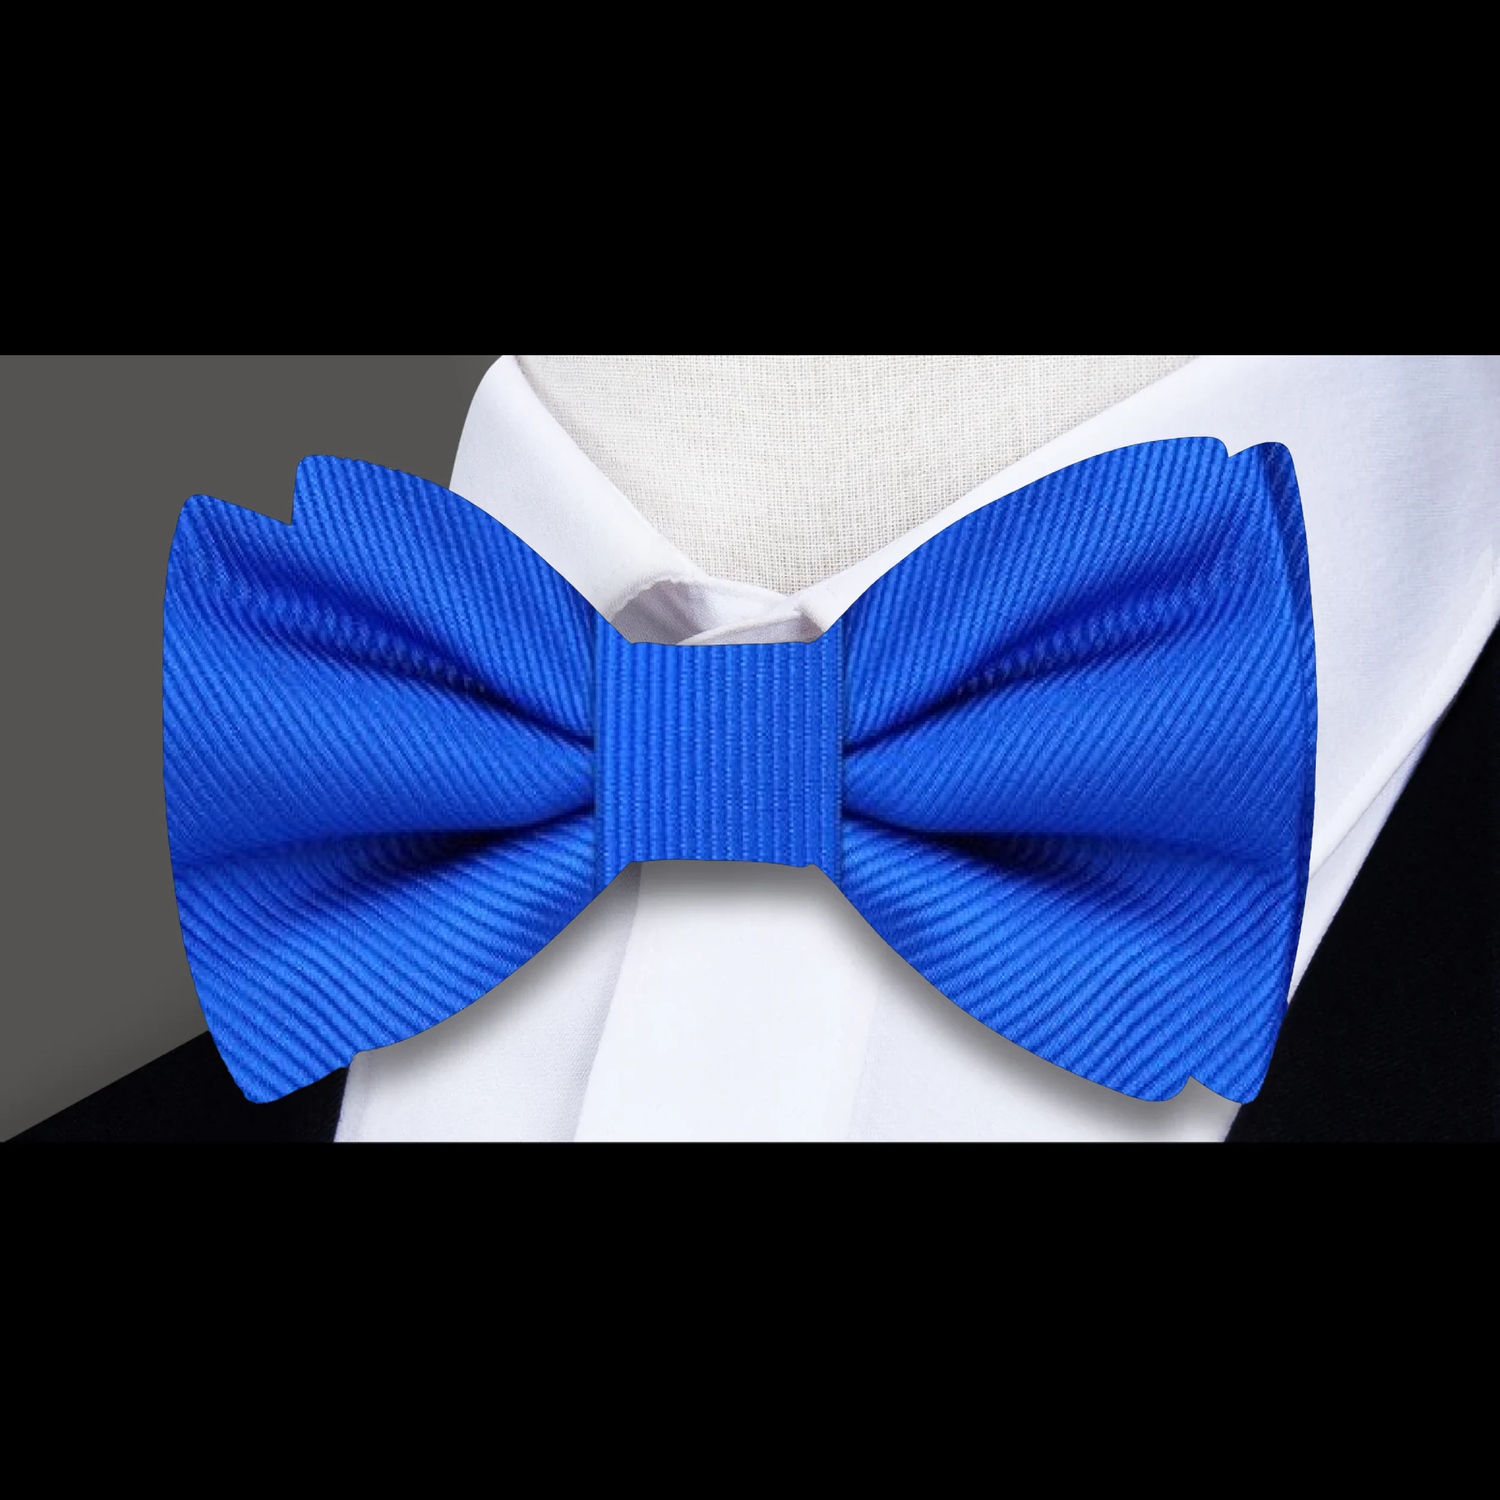 A Solid Sky Blue Bow Tie With Lined Texture, Matching Pocket Square